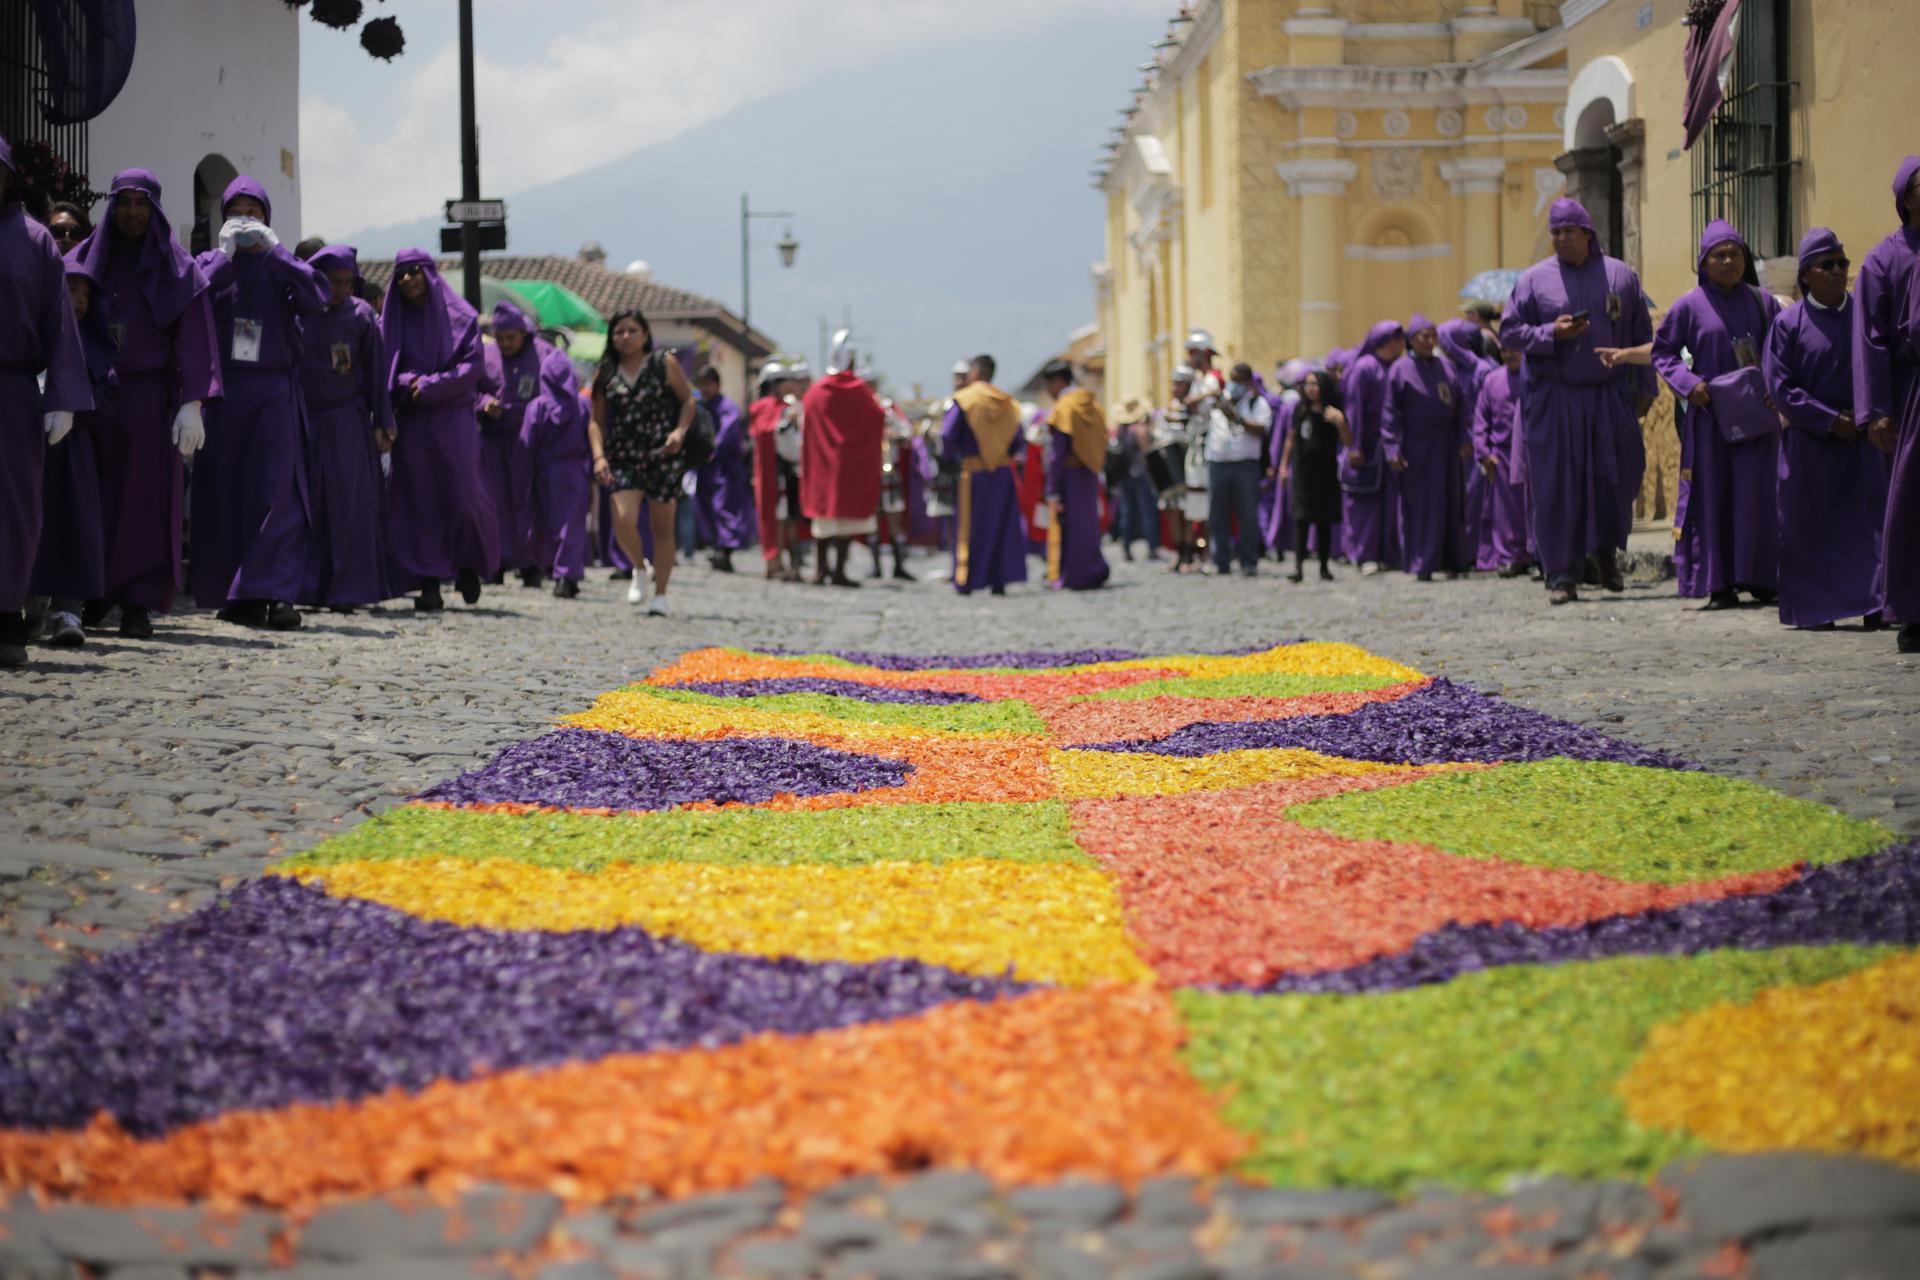 A street carpet known as an alfombra created by Francisco Orellana and his friends in Antigua, Guatemala.